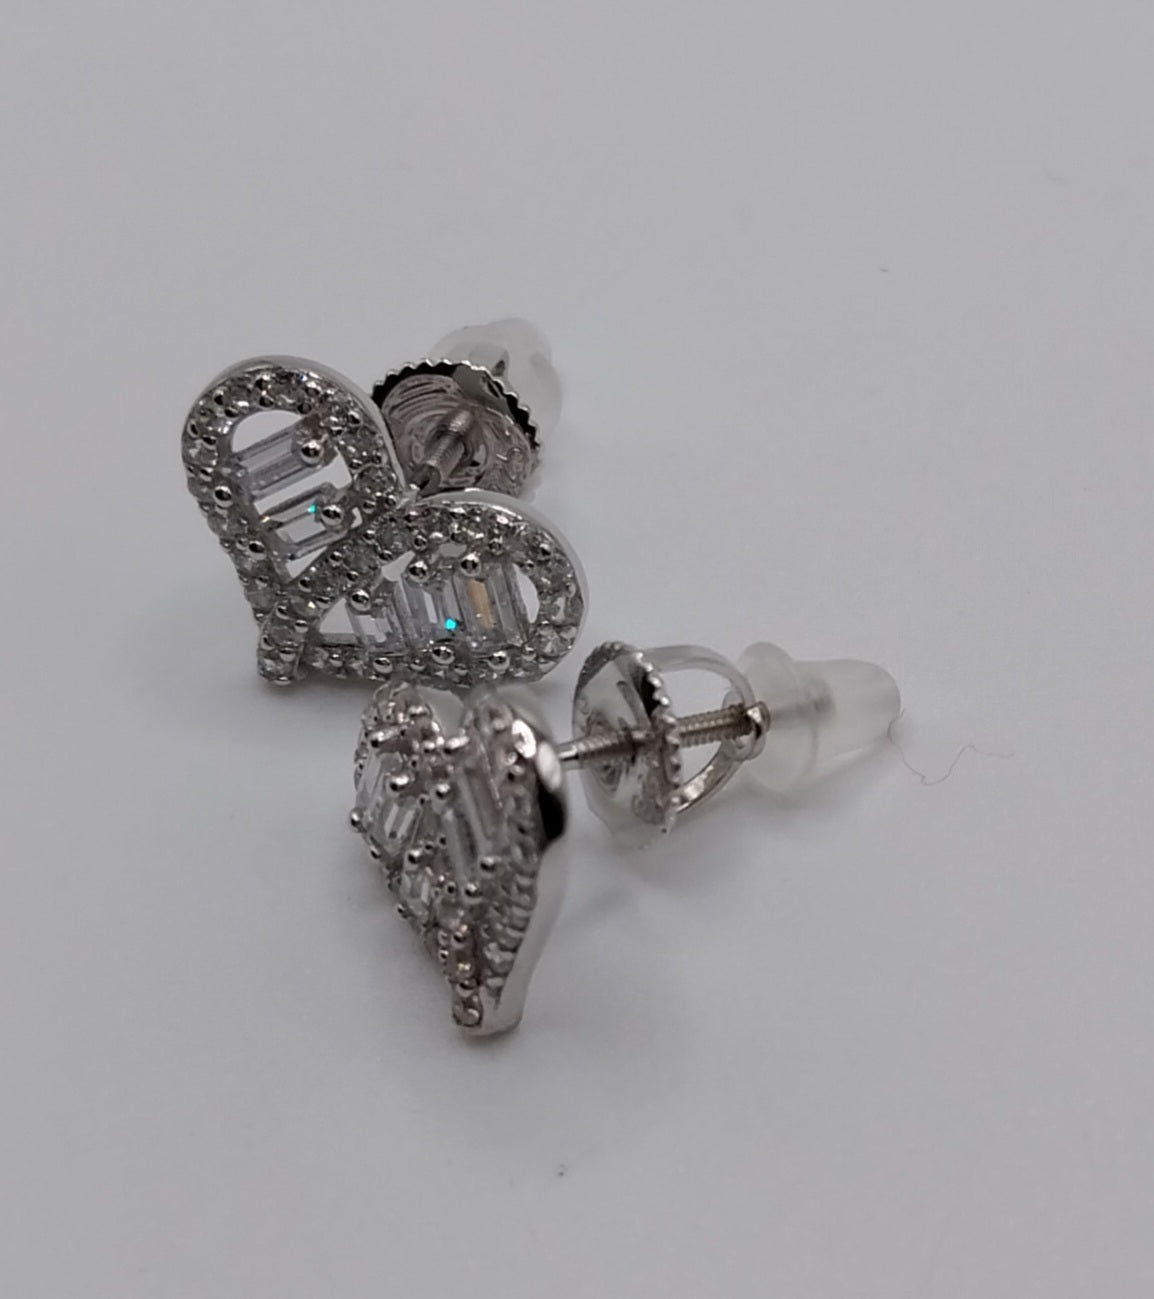 Heart Stud Earrings with White Cubic Zirconia Stones